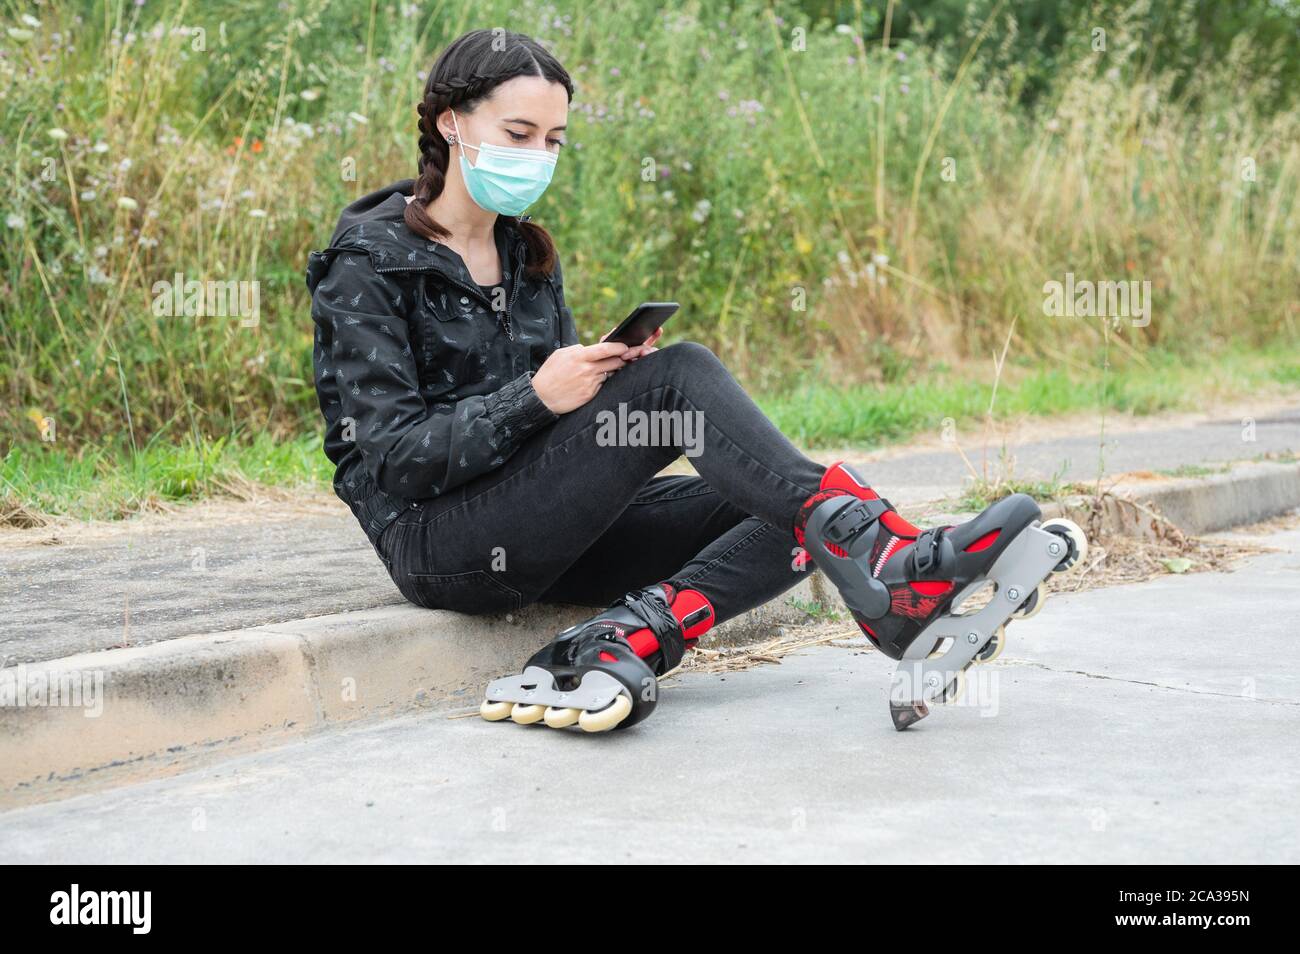 Woman in protective face mask, on roller skating pause, sitting on the street and using mobile phone during coronavirus pandemic outbreak. Urban Girl Stock Photo